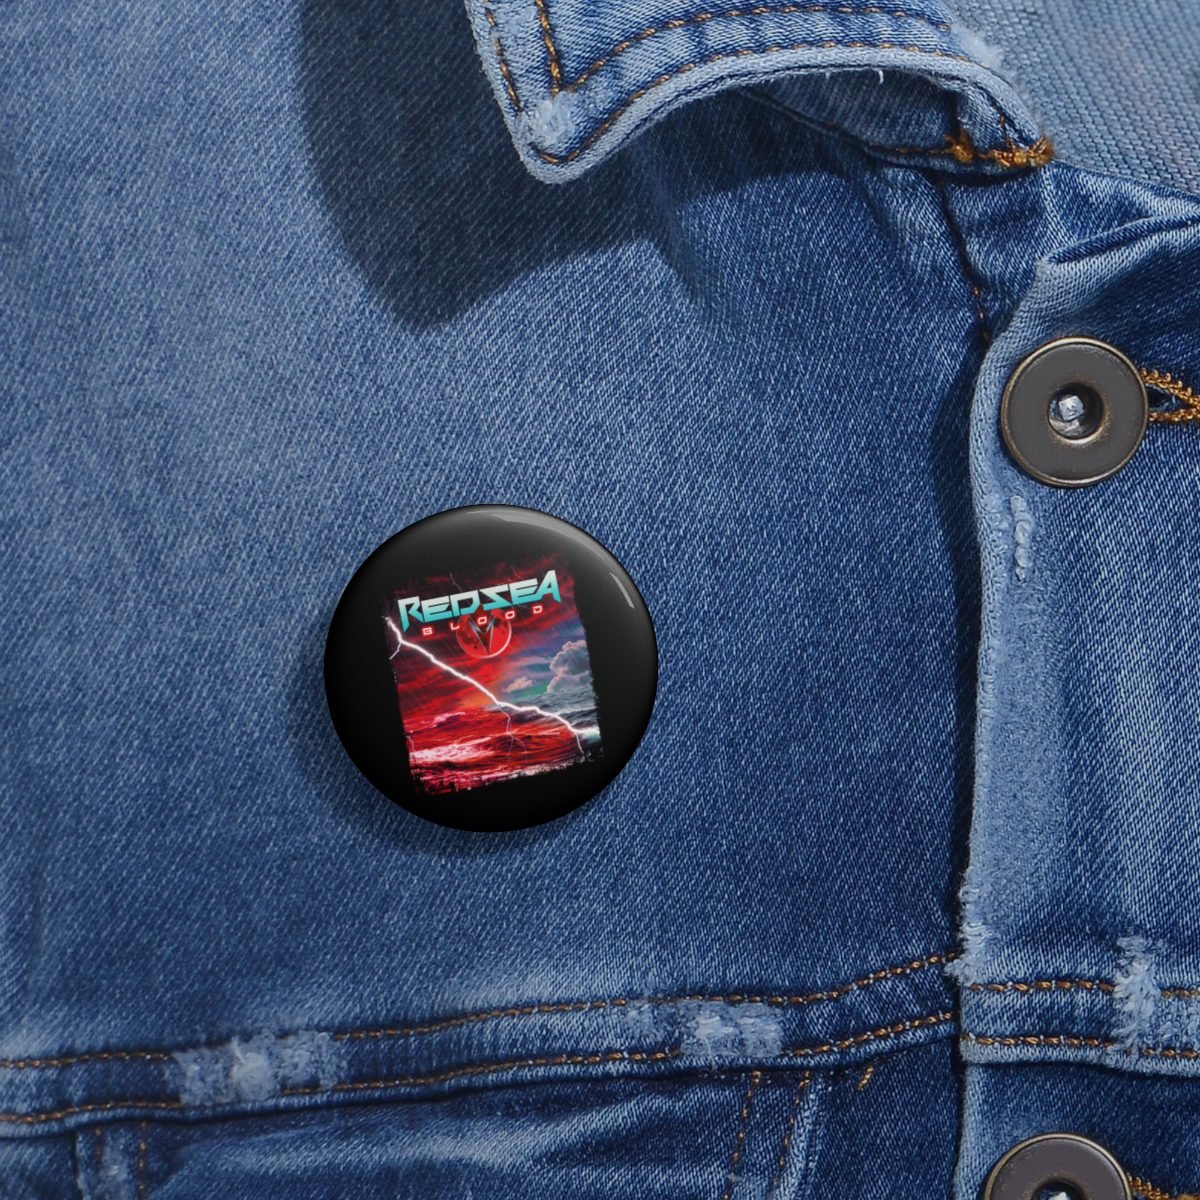 Red Sea – Blood Pin Buttons